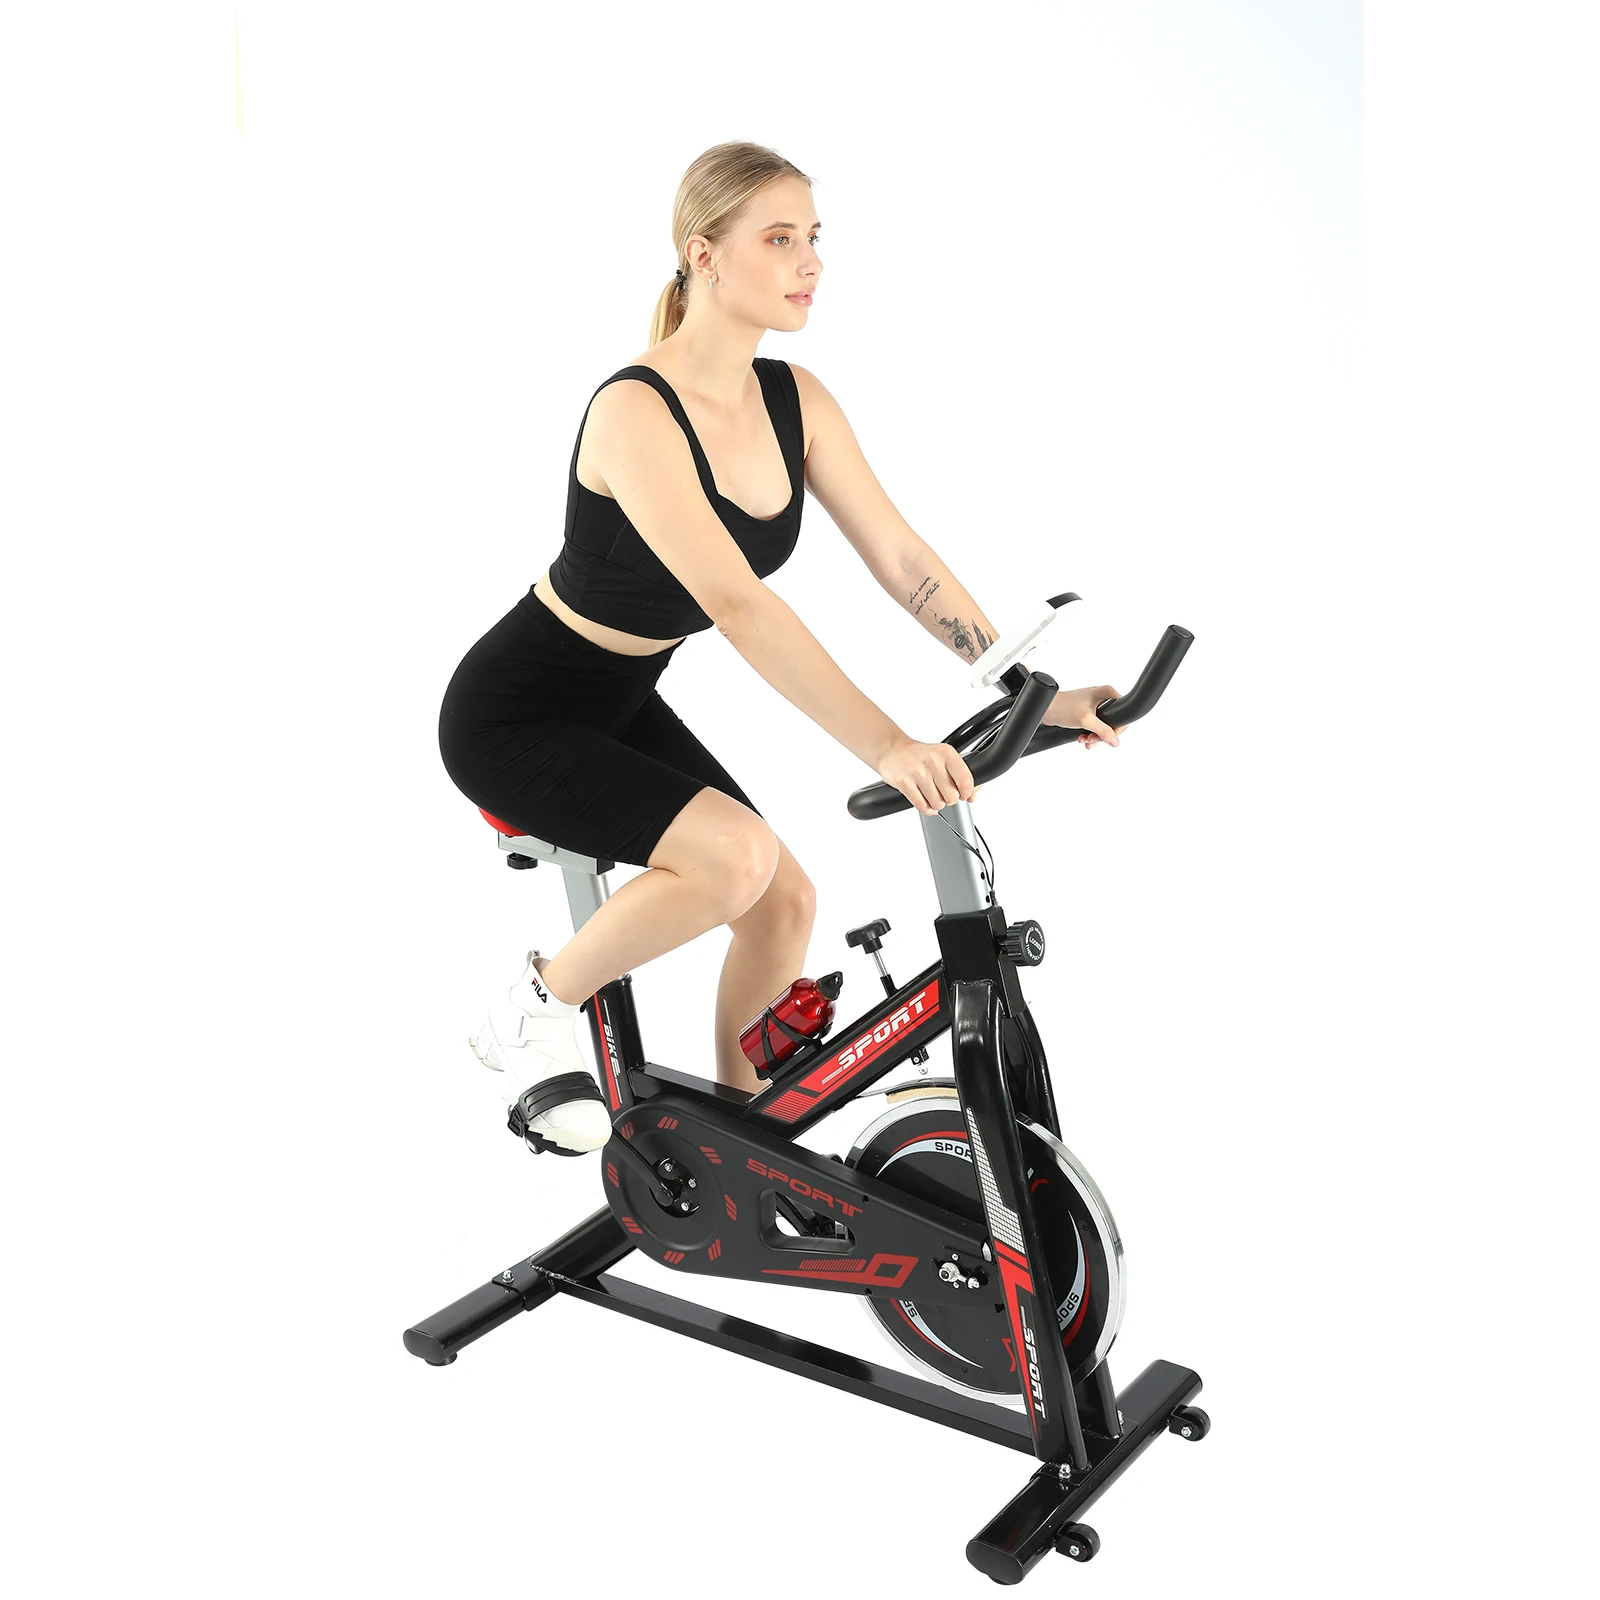 

Indoor Exercise Spinning Bike Gym Equipment Newest Fitness Home Black Red Unisex Steel Packing Color Flywheel Feature Weight Kgs